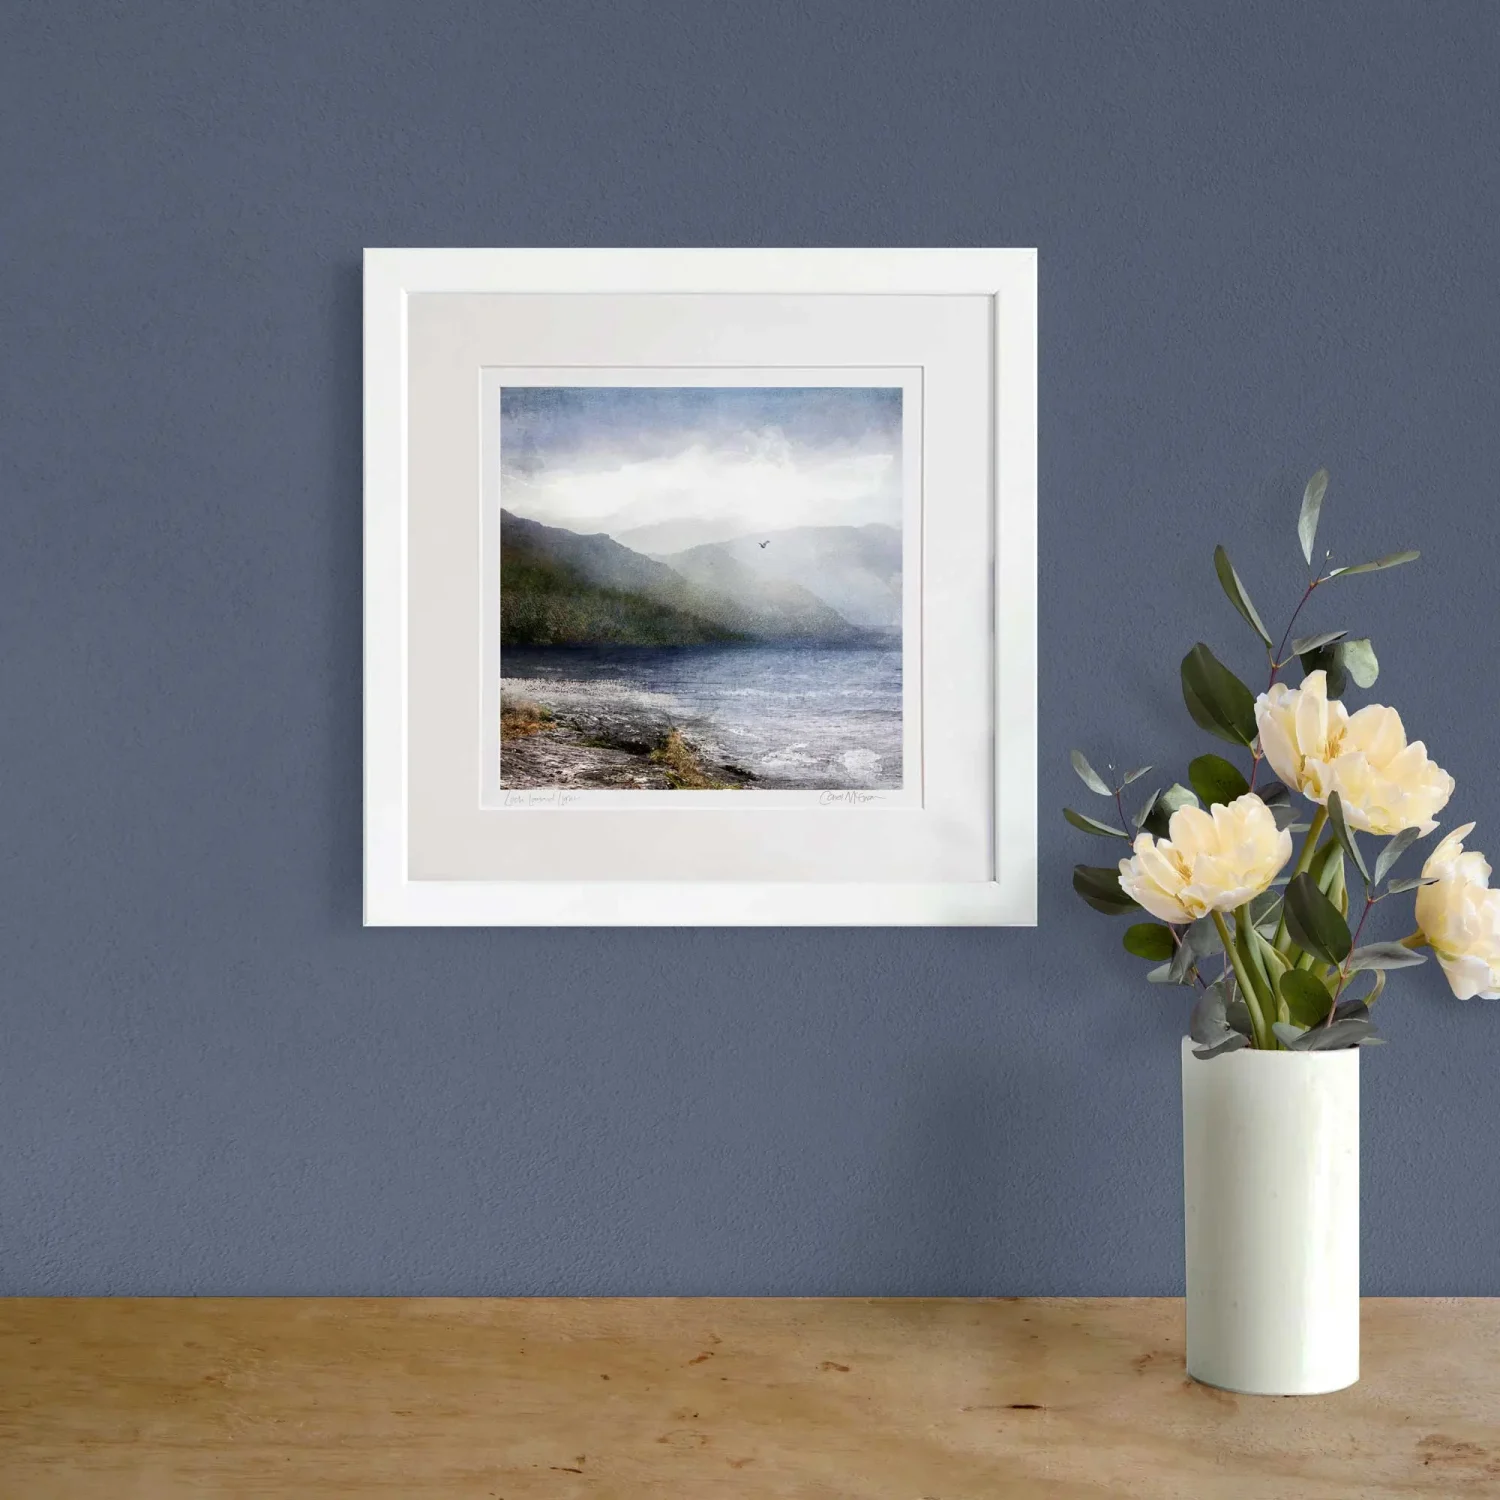 Loch Lomond art print in a white frame on a navy wall with a vase of flowers next to it on a wooden table